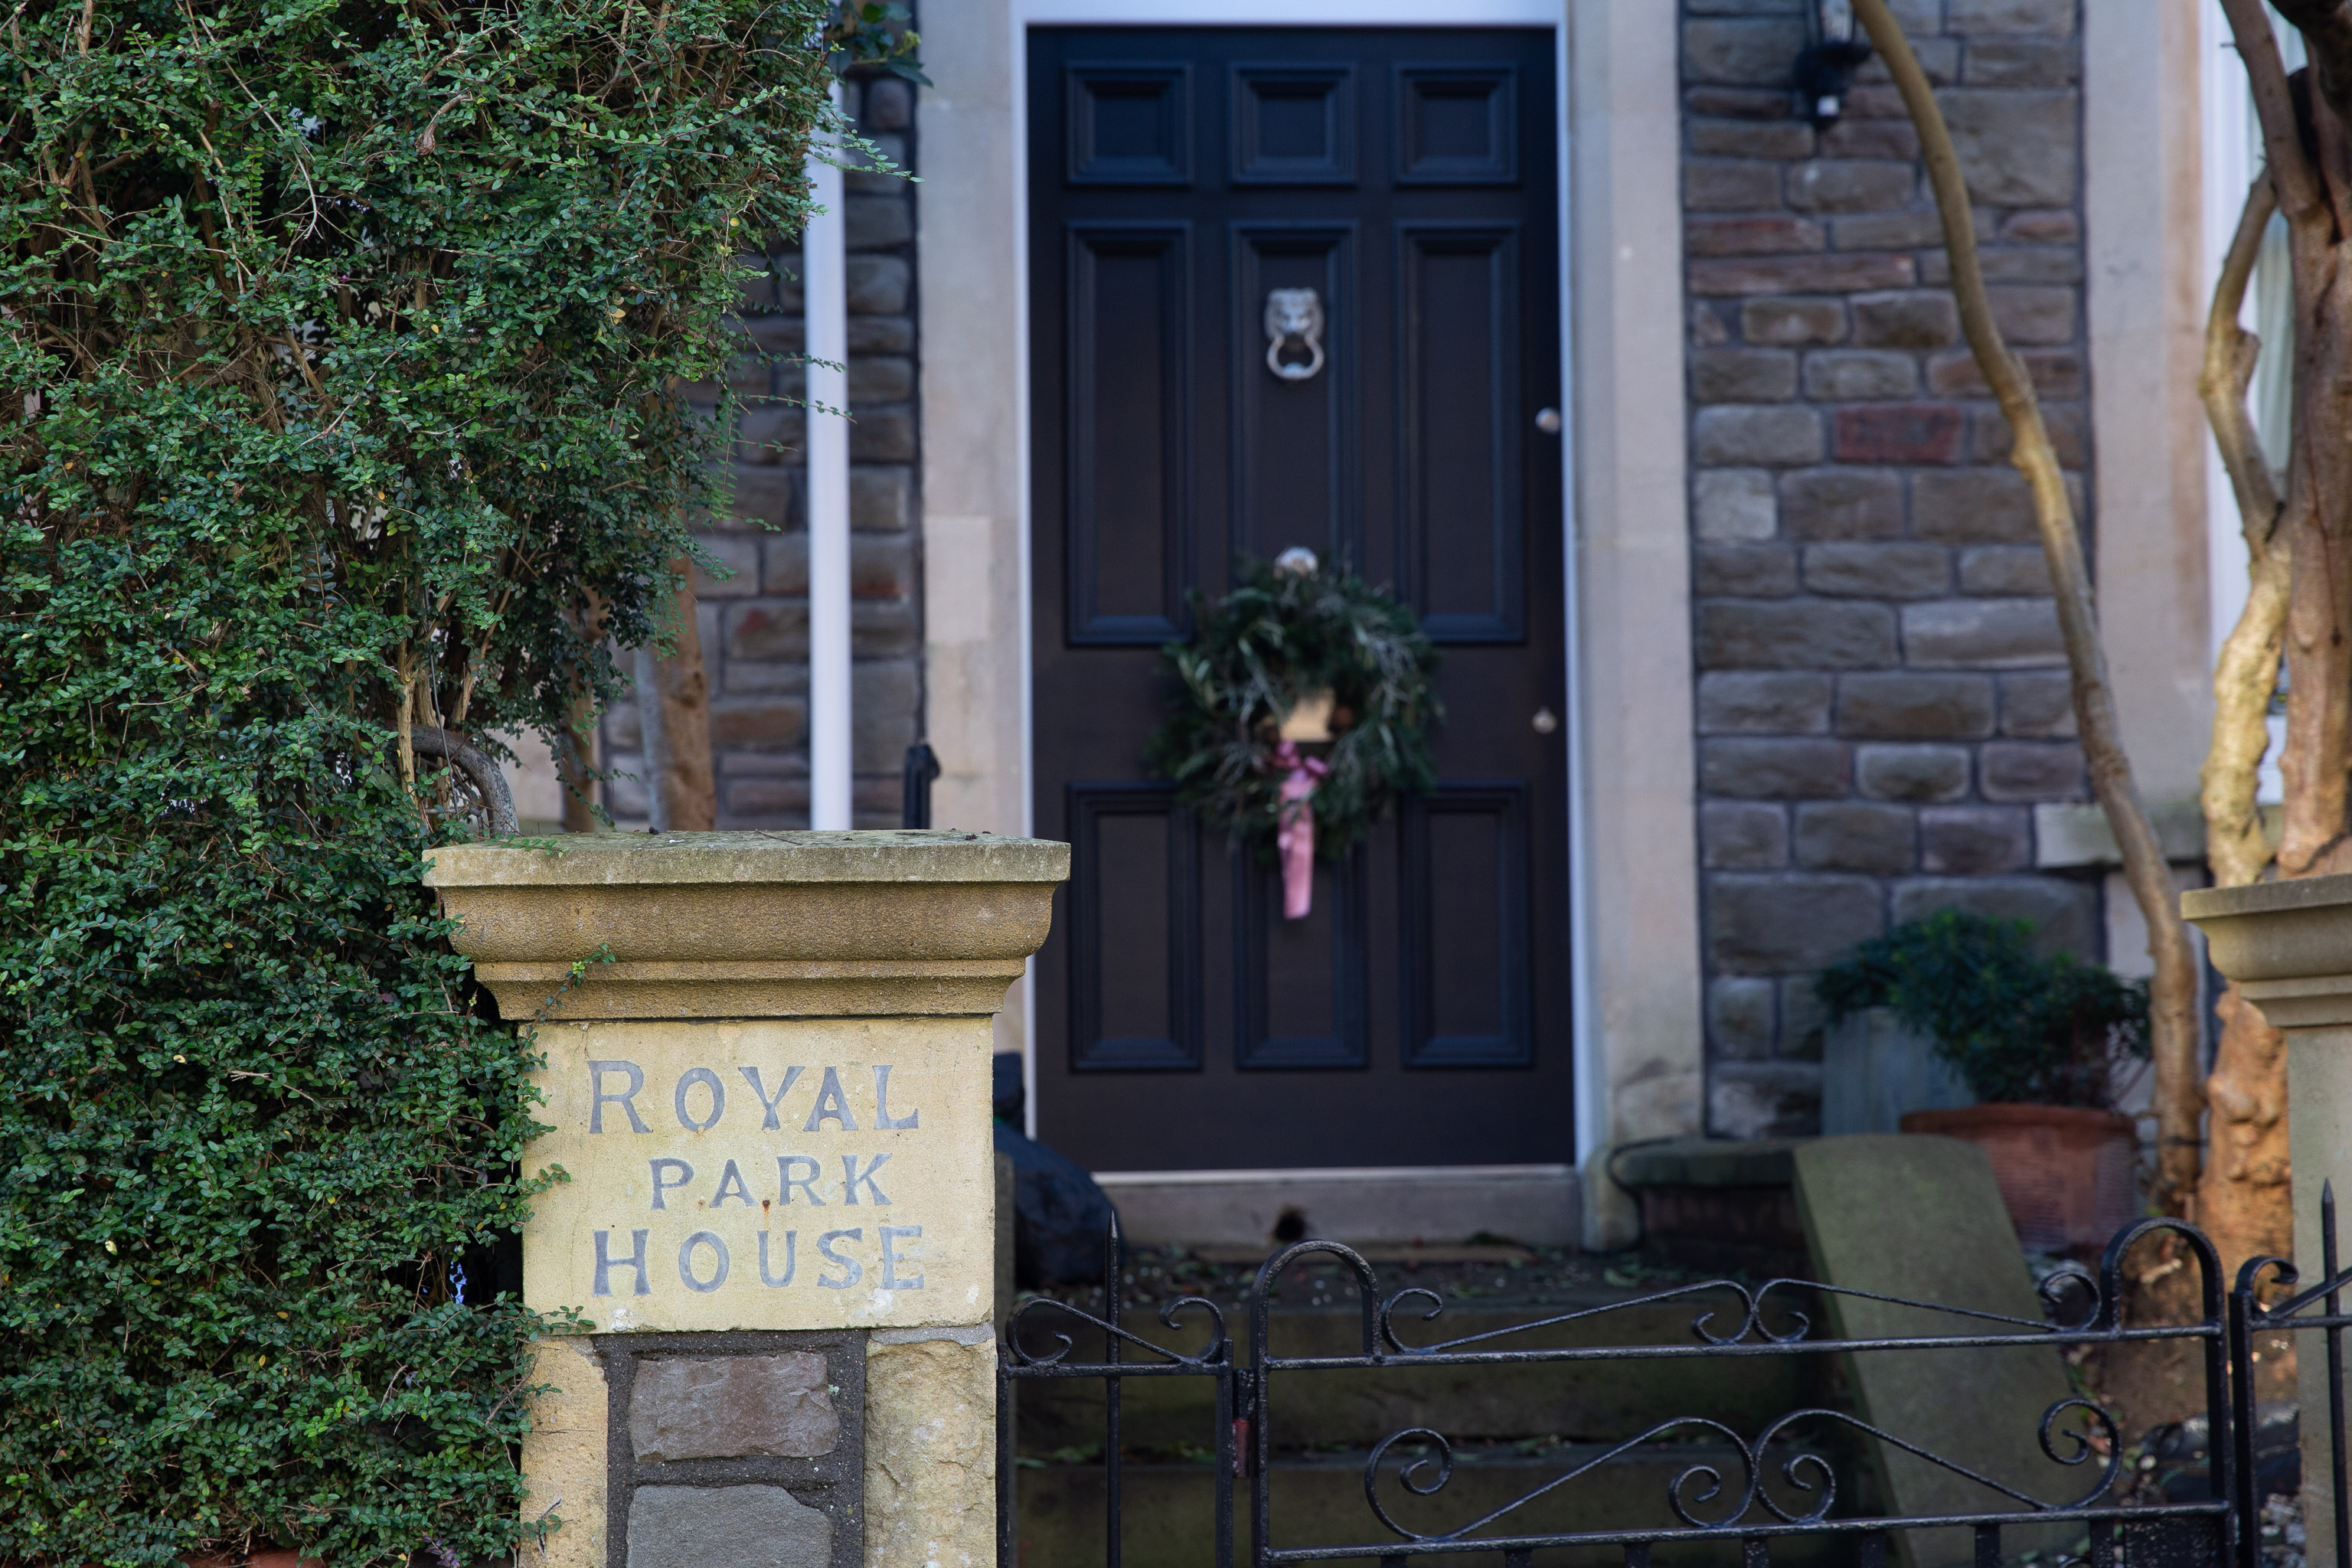 Royal Park House
Love the hand-lettered style
